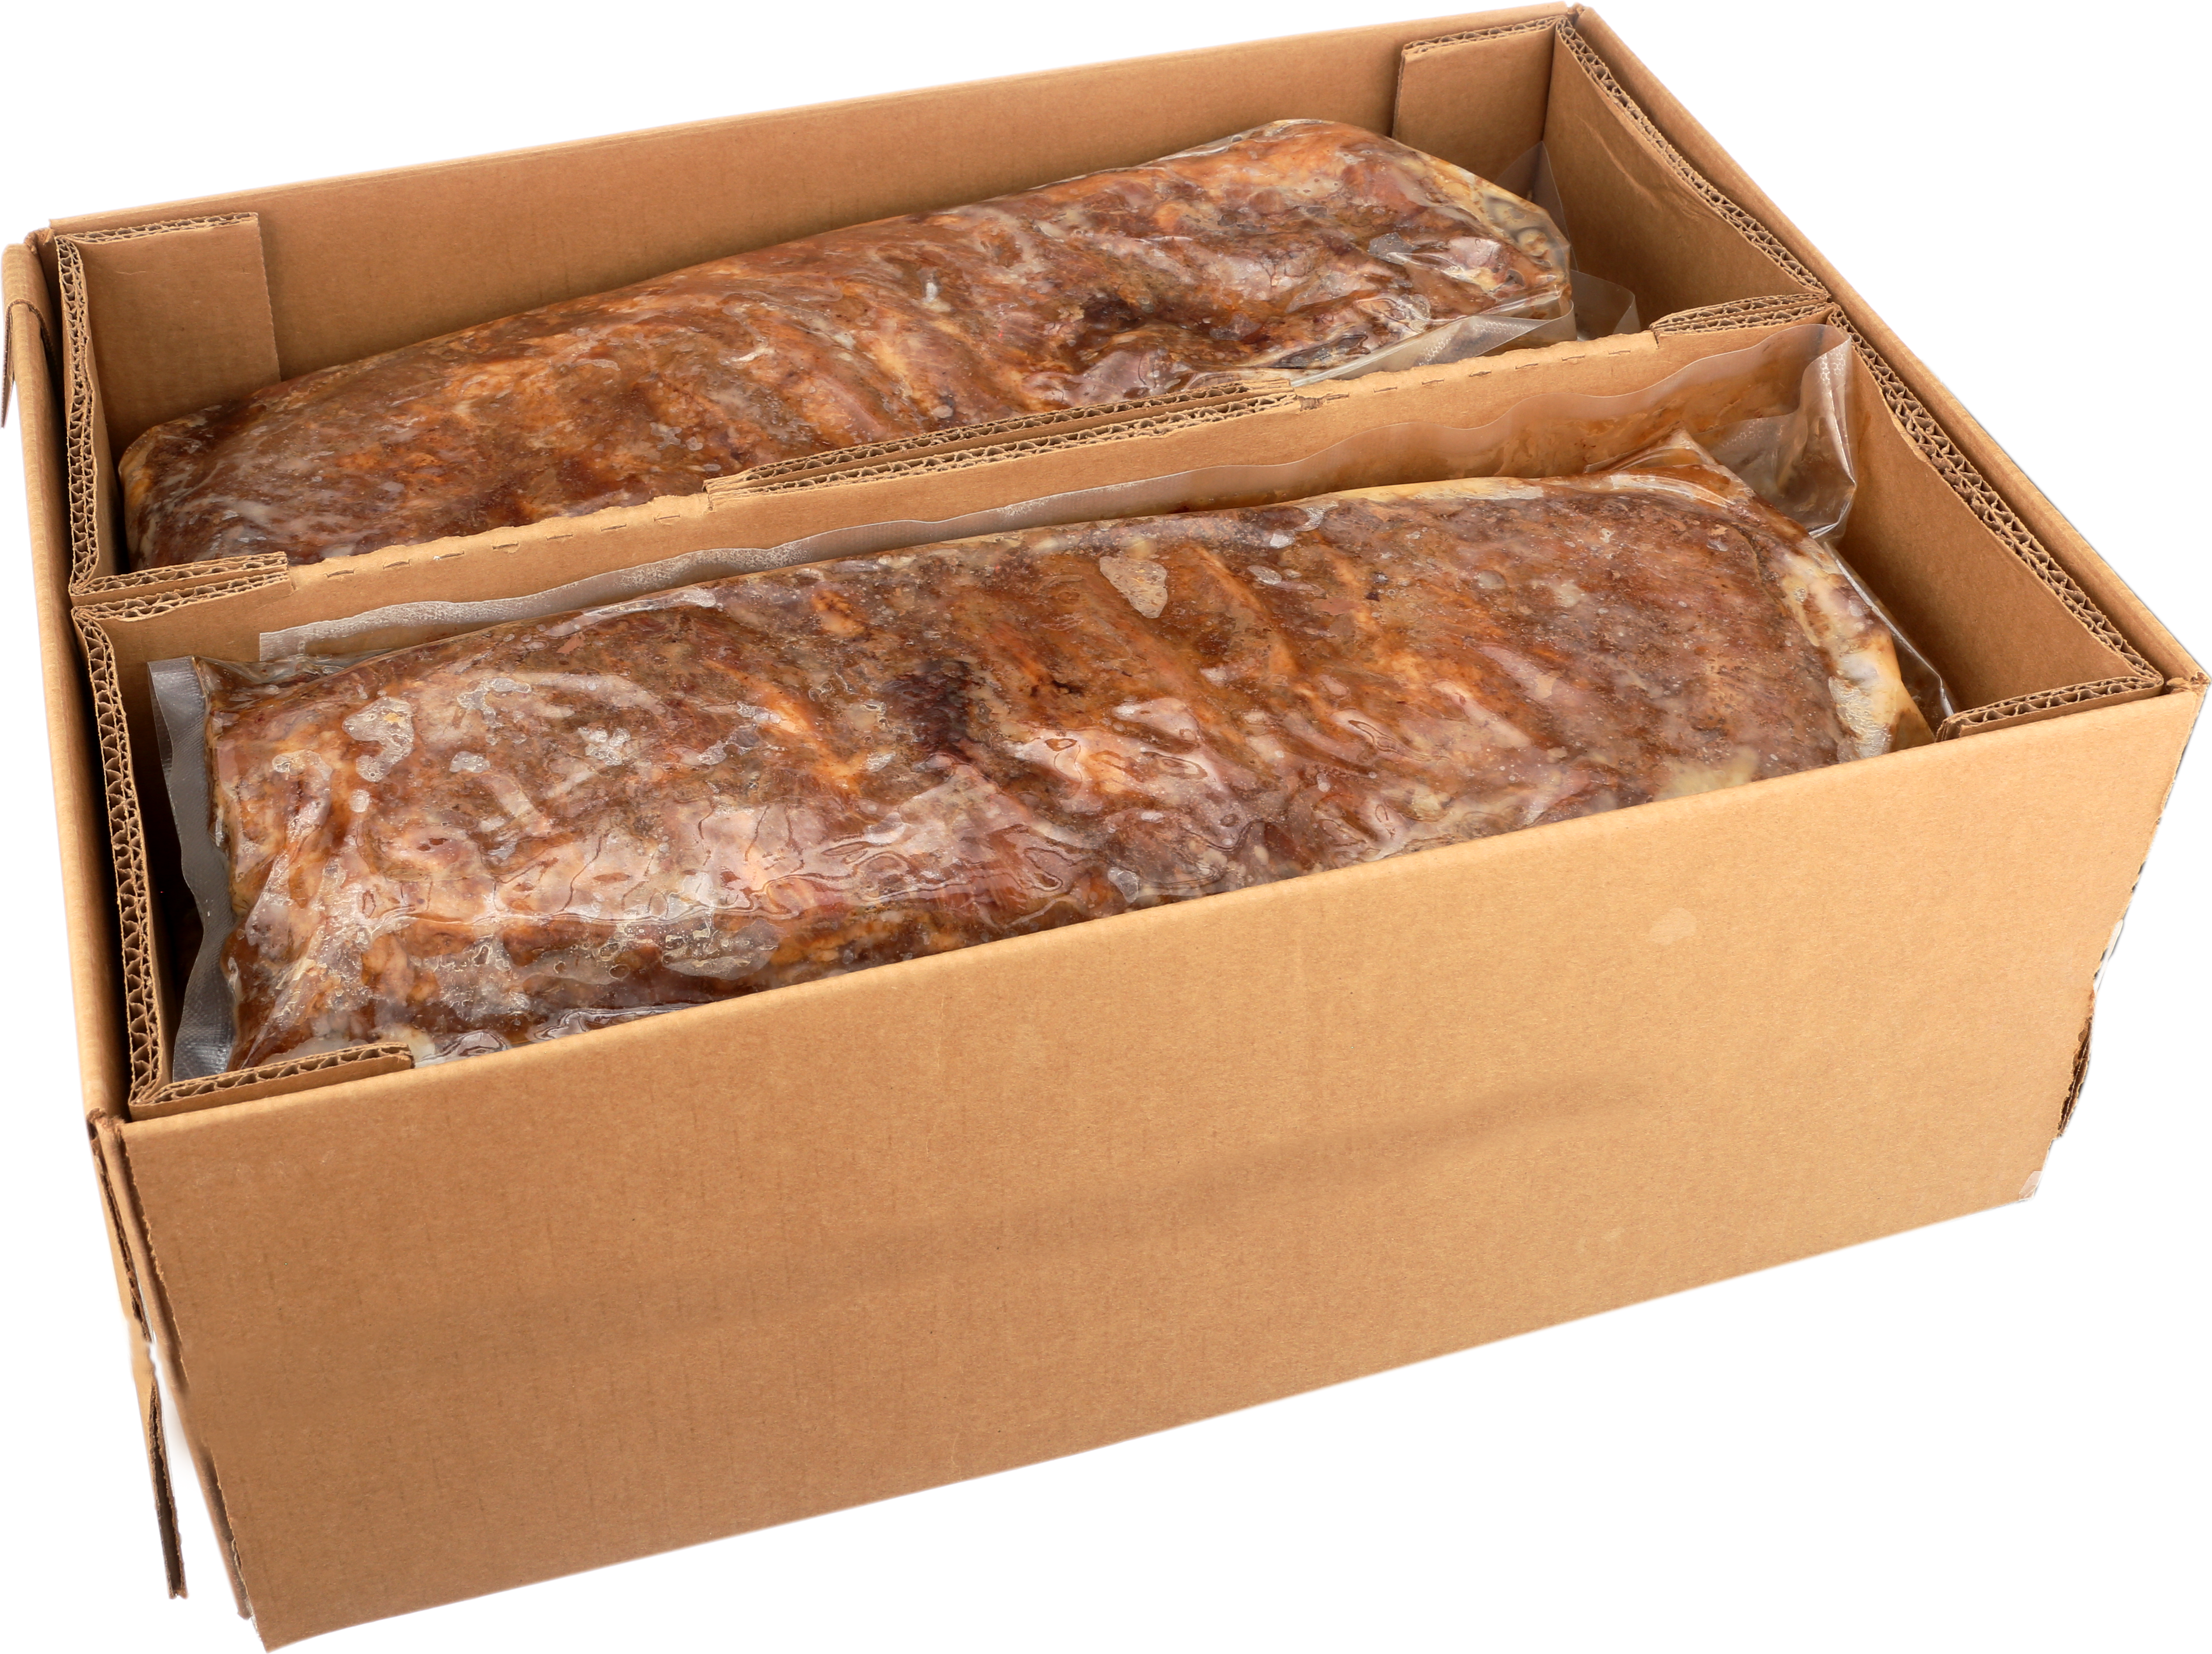 Black Oak™ Fully Cooked, Seasoned St. Louis Style PK Spare Ribs, SMK Flavor and CRML Color Added _image_41